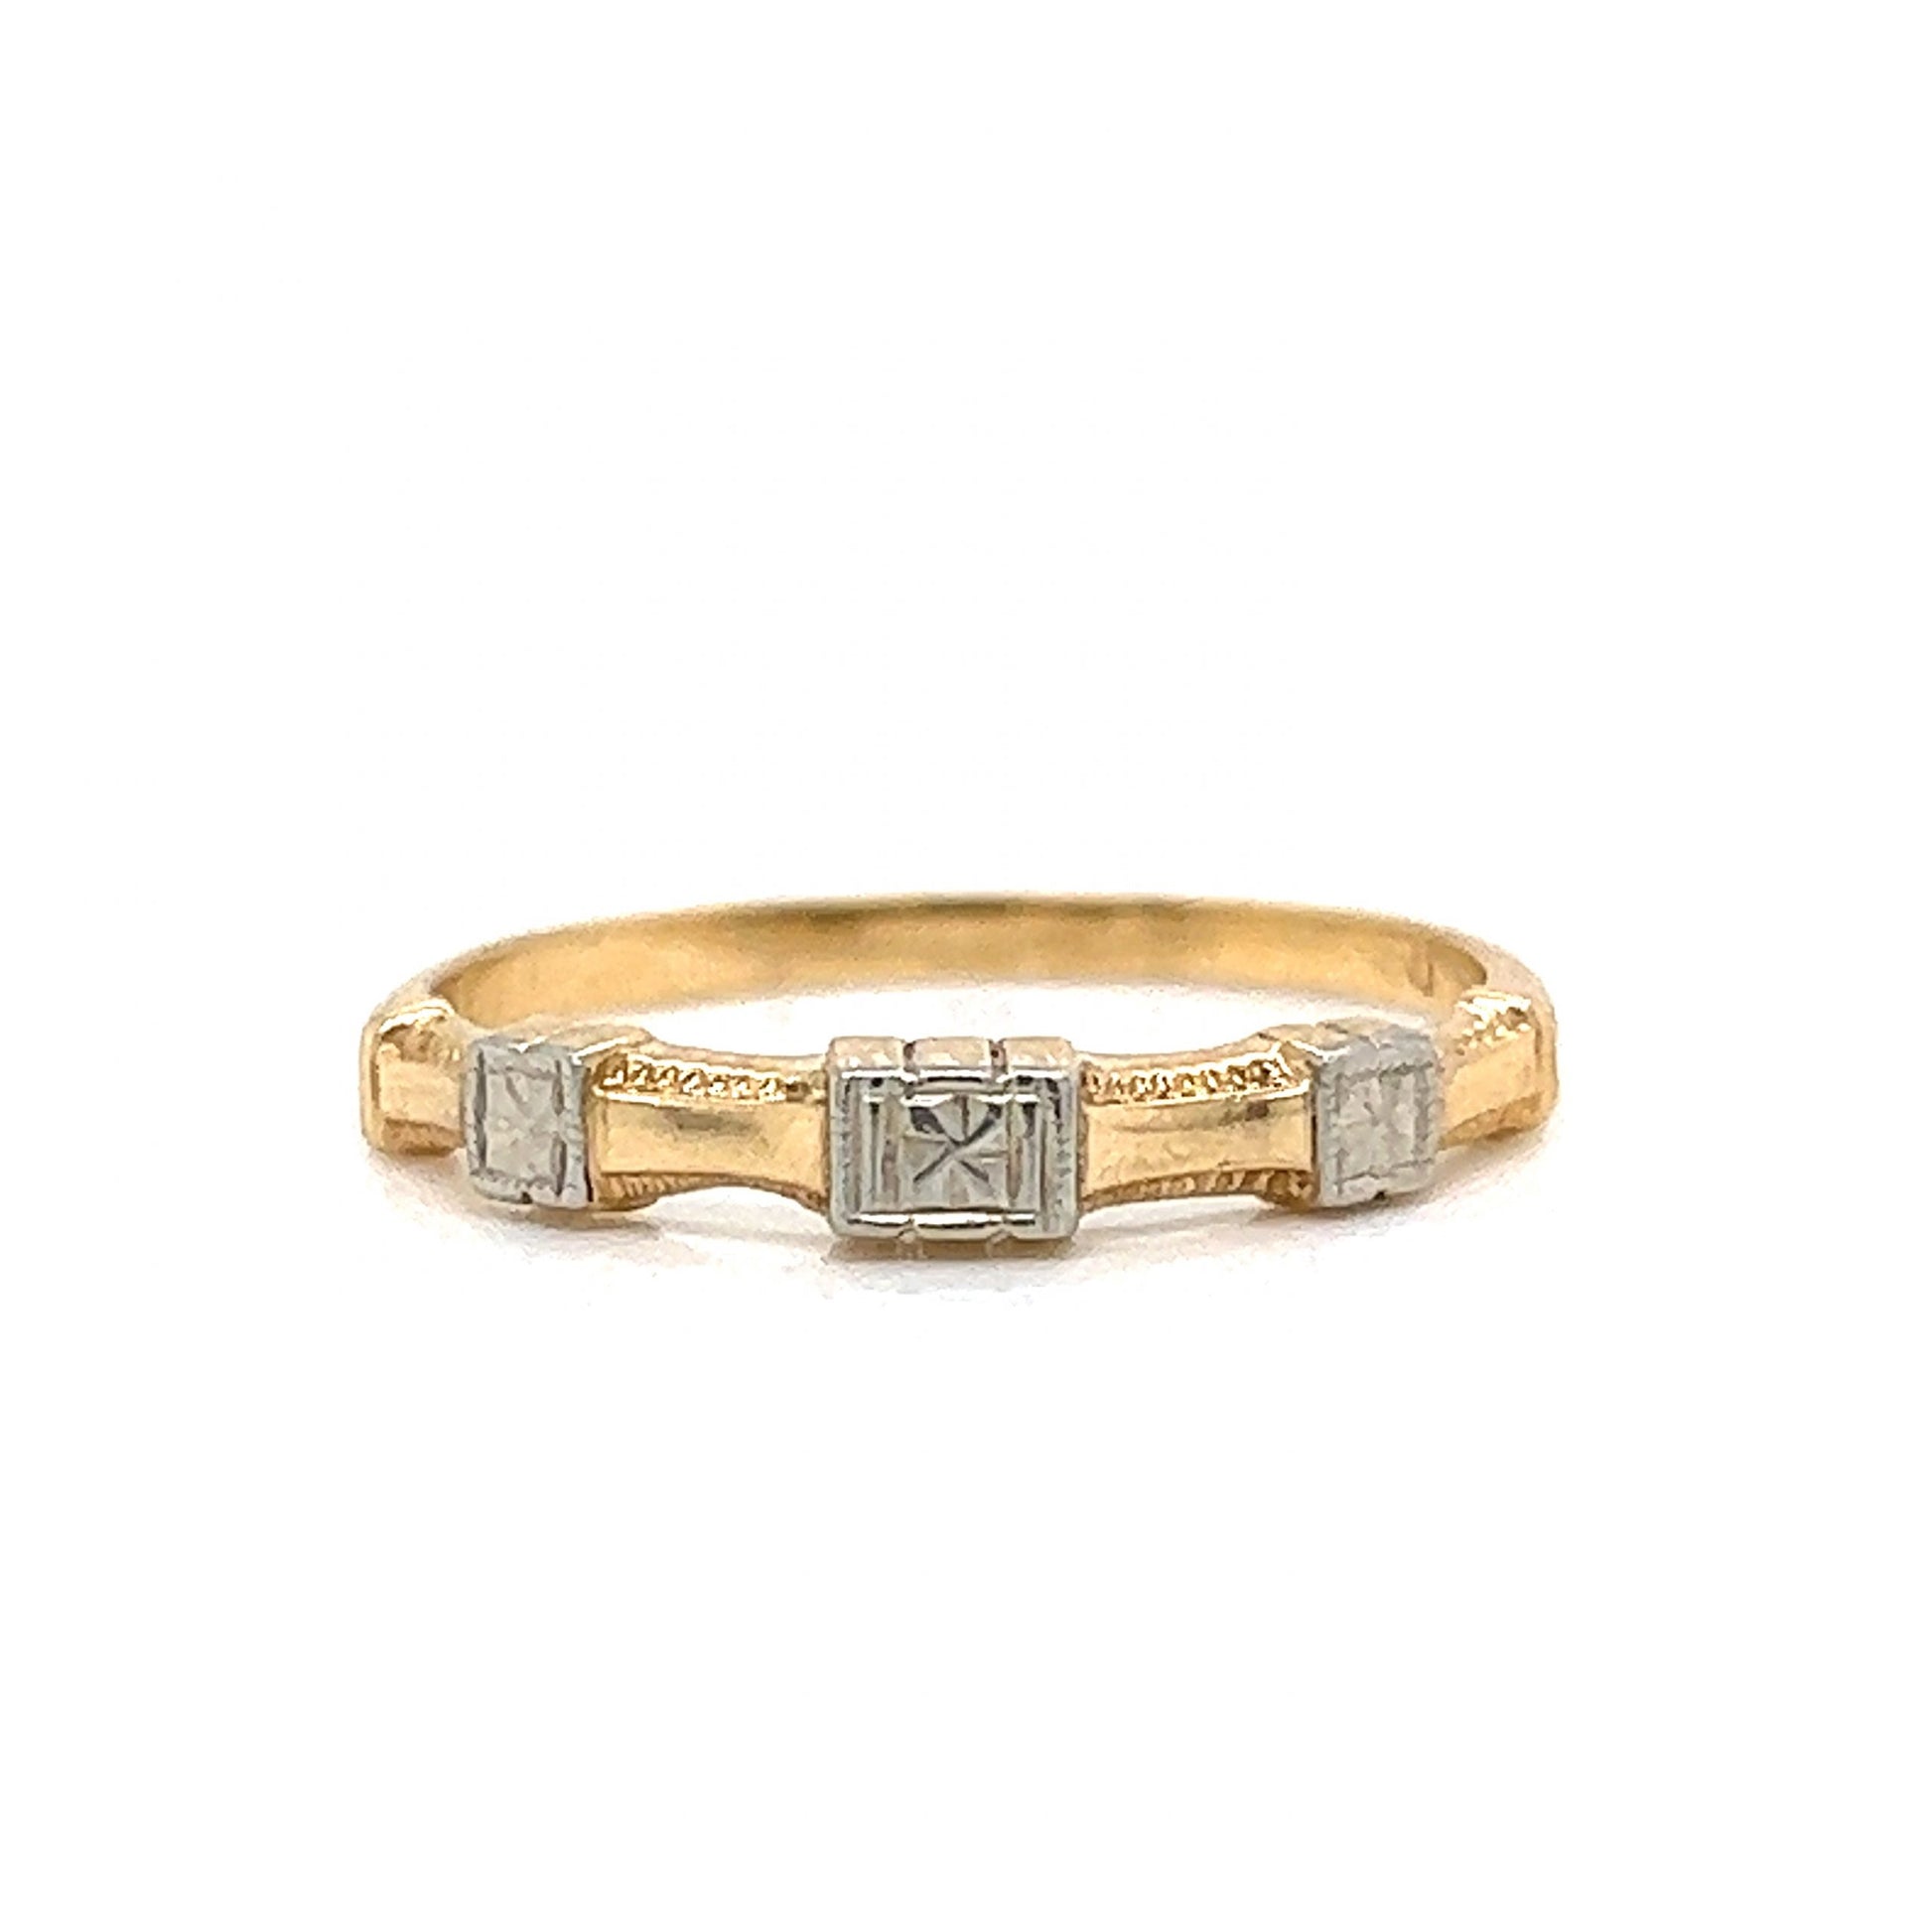 Retro Two-Toned Station Wedding Band in 14k Gold